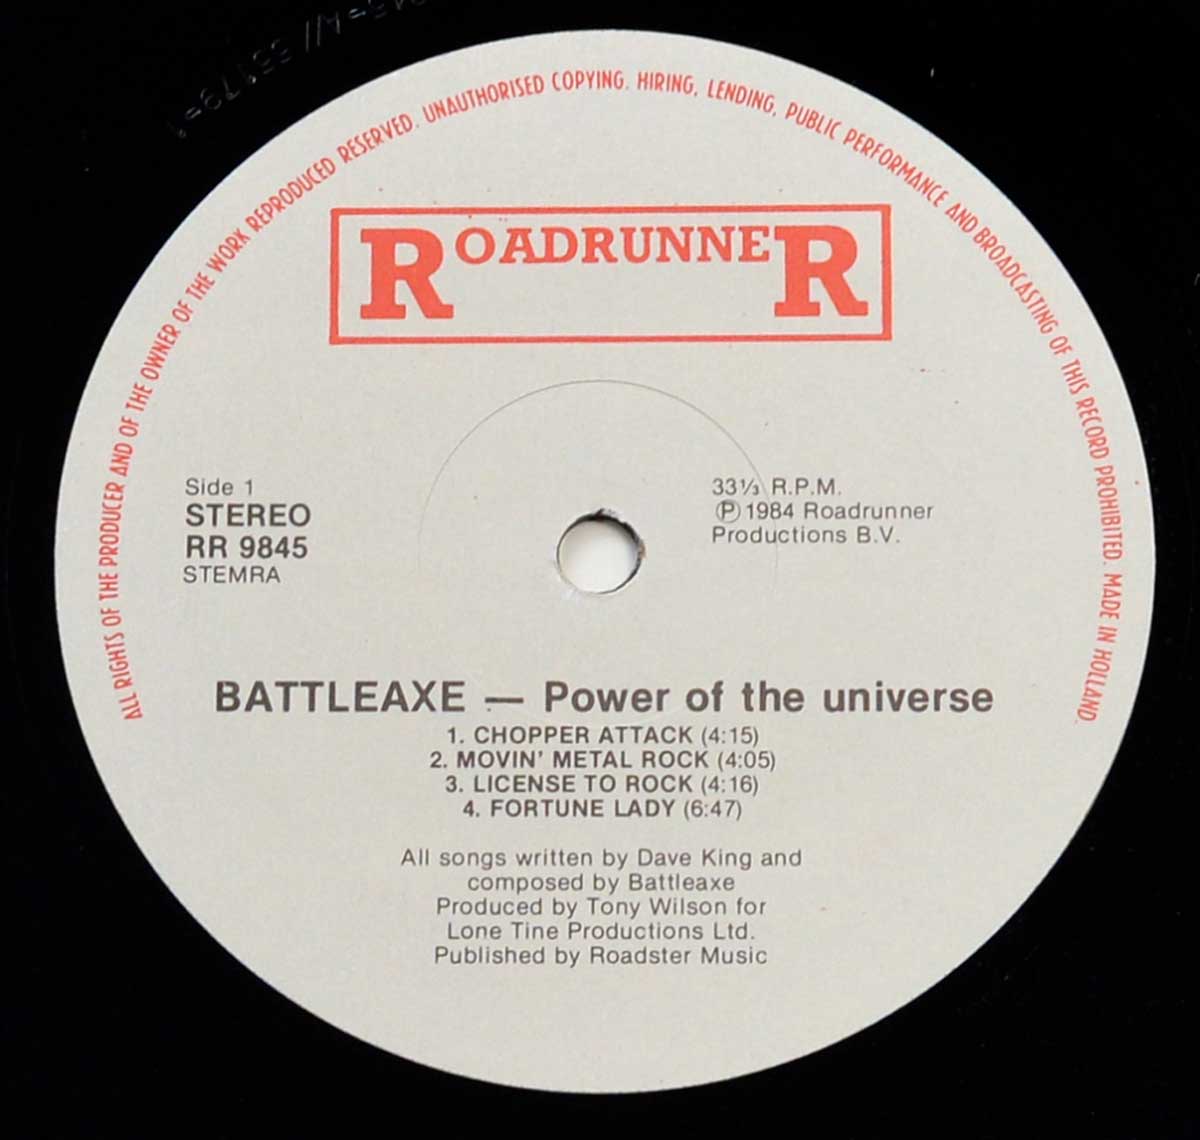 Enlarged High Resolution Photo of the Record's label BATTLEAXE -  Power from The Universe https://vinyl-records.nl